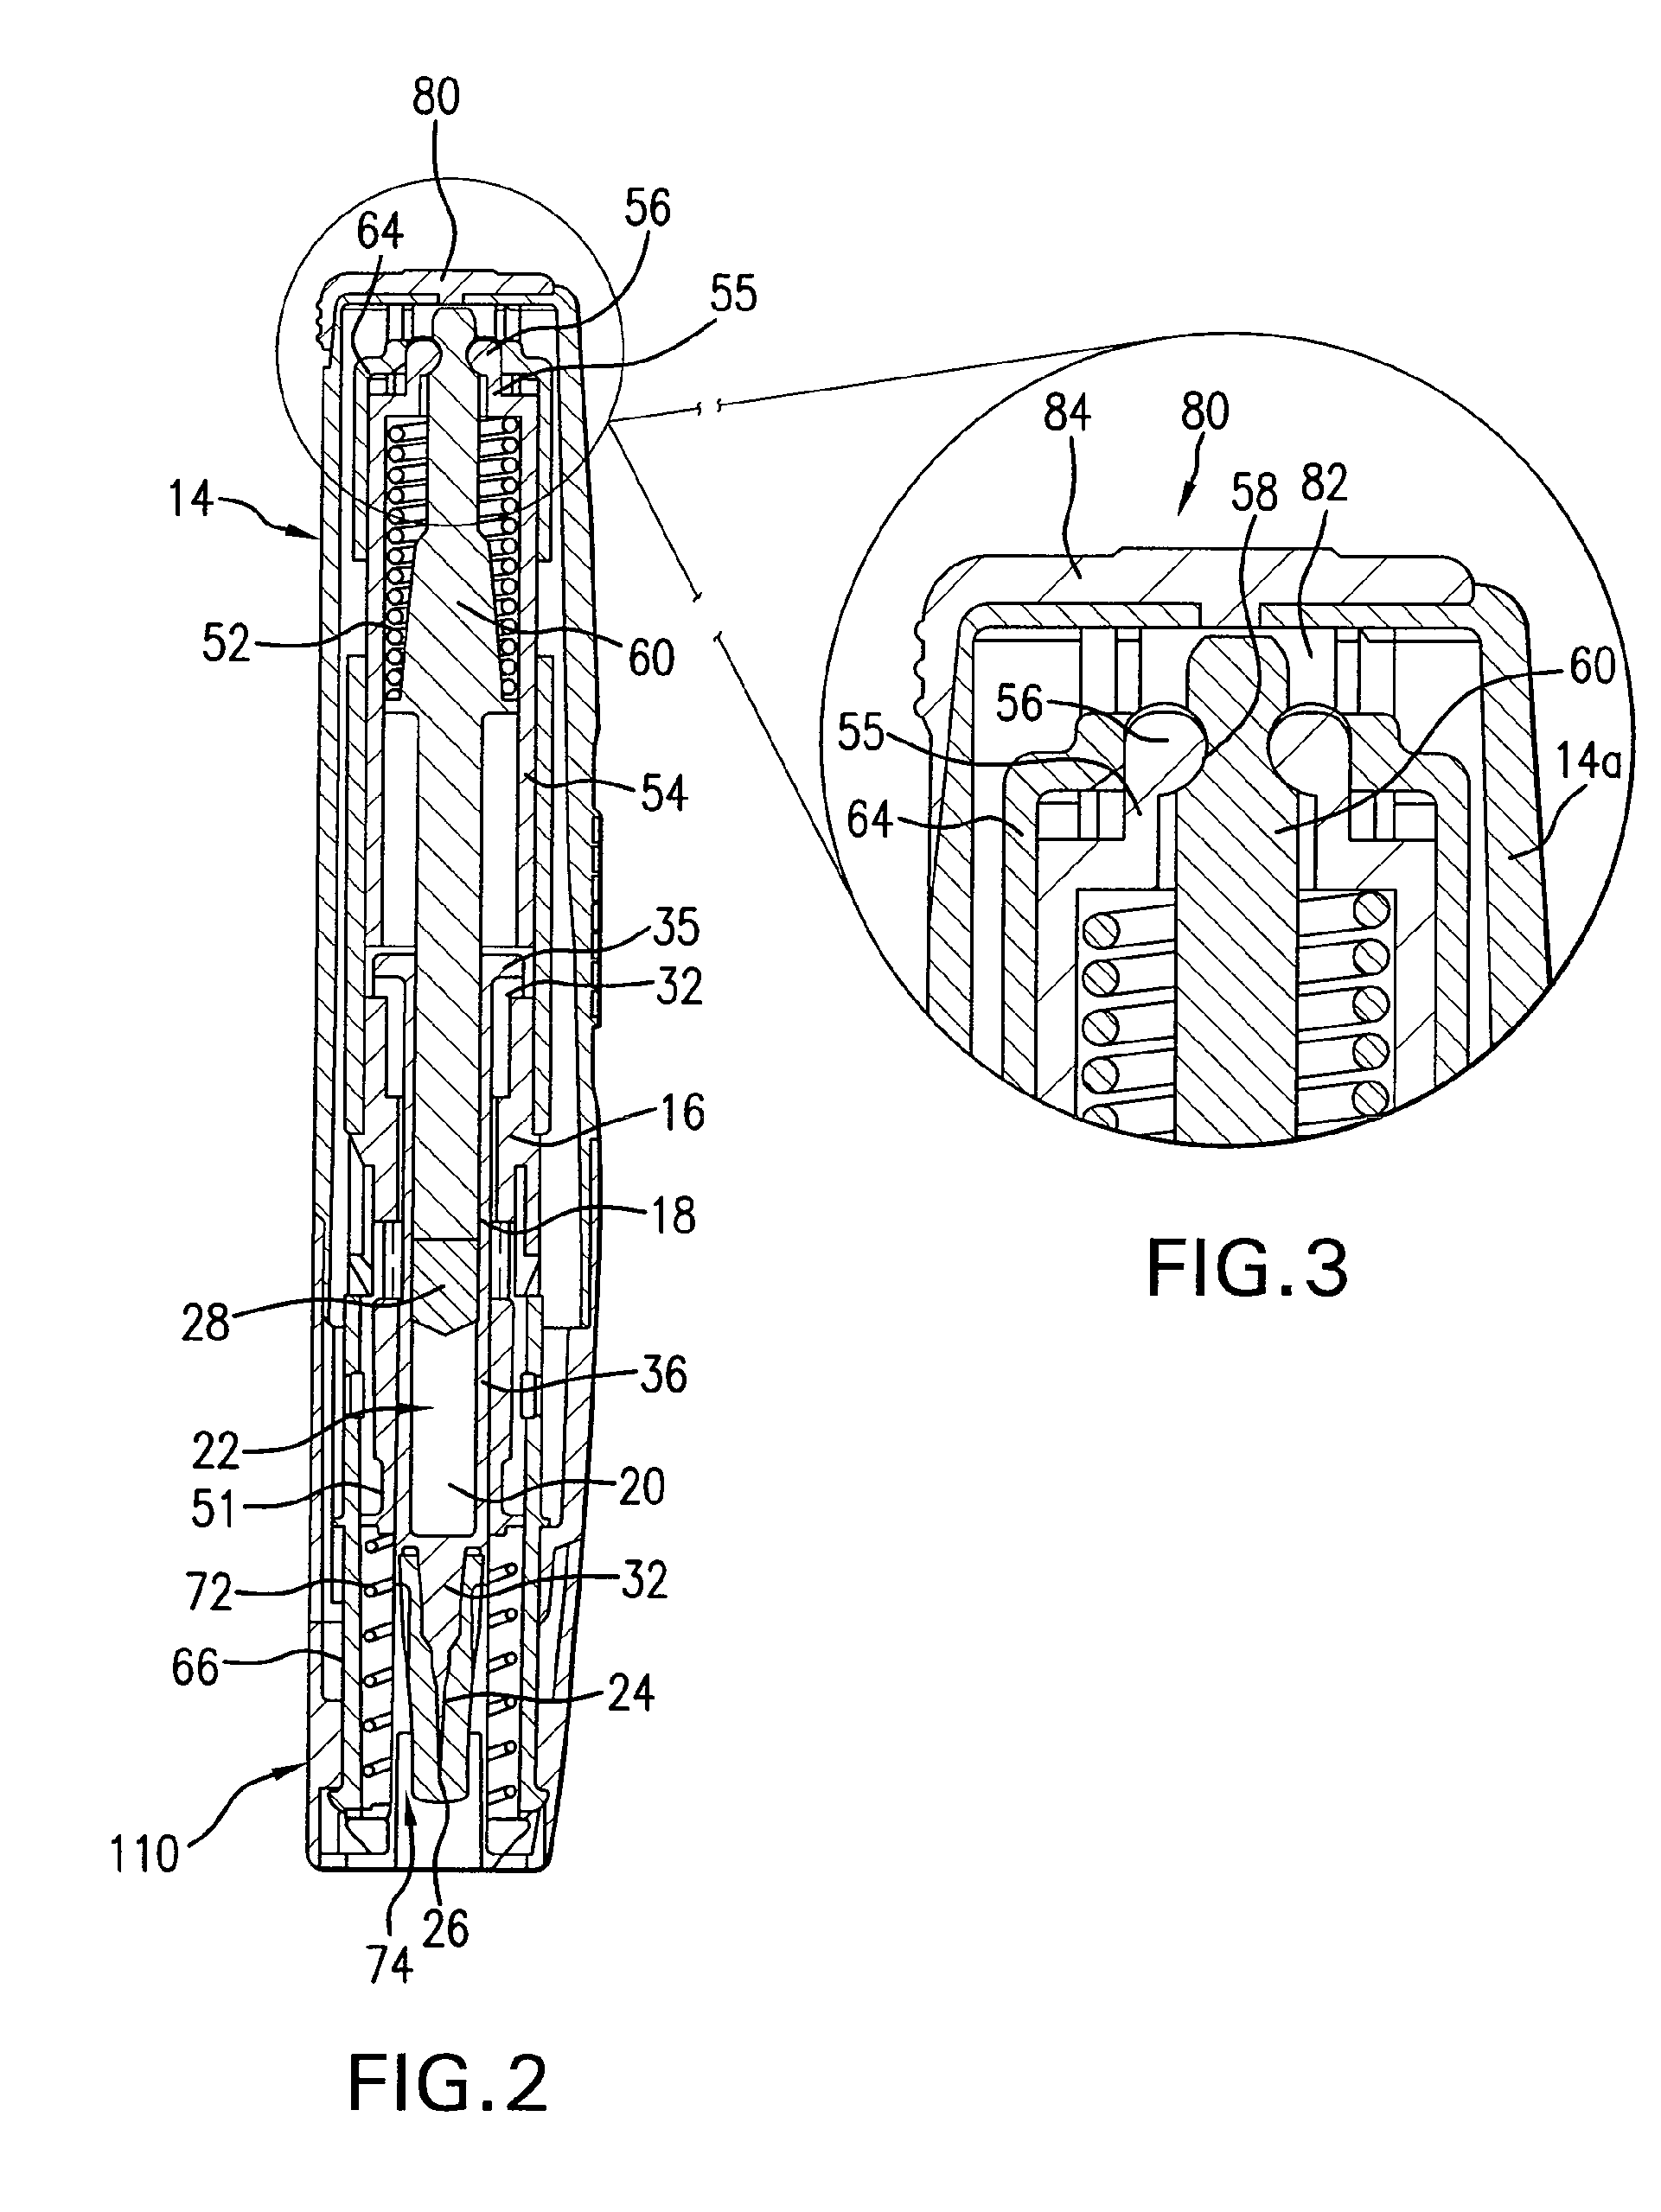 Injector safety device